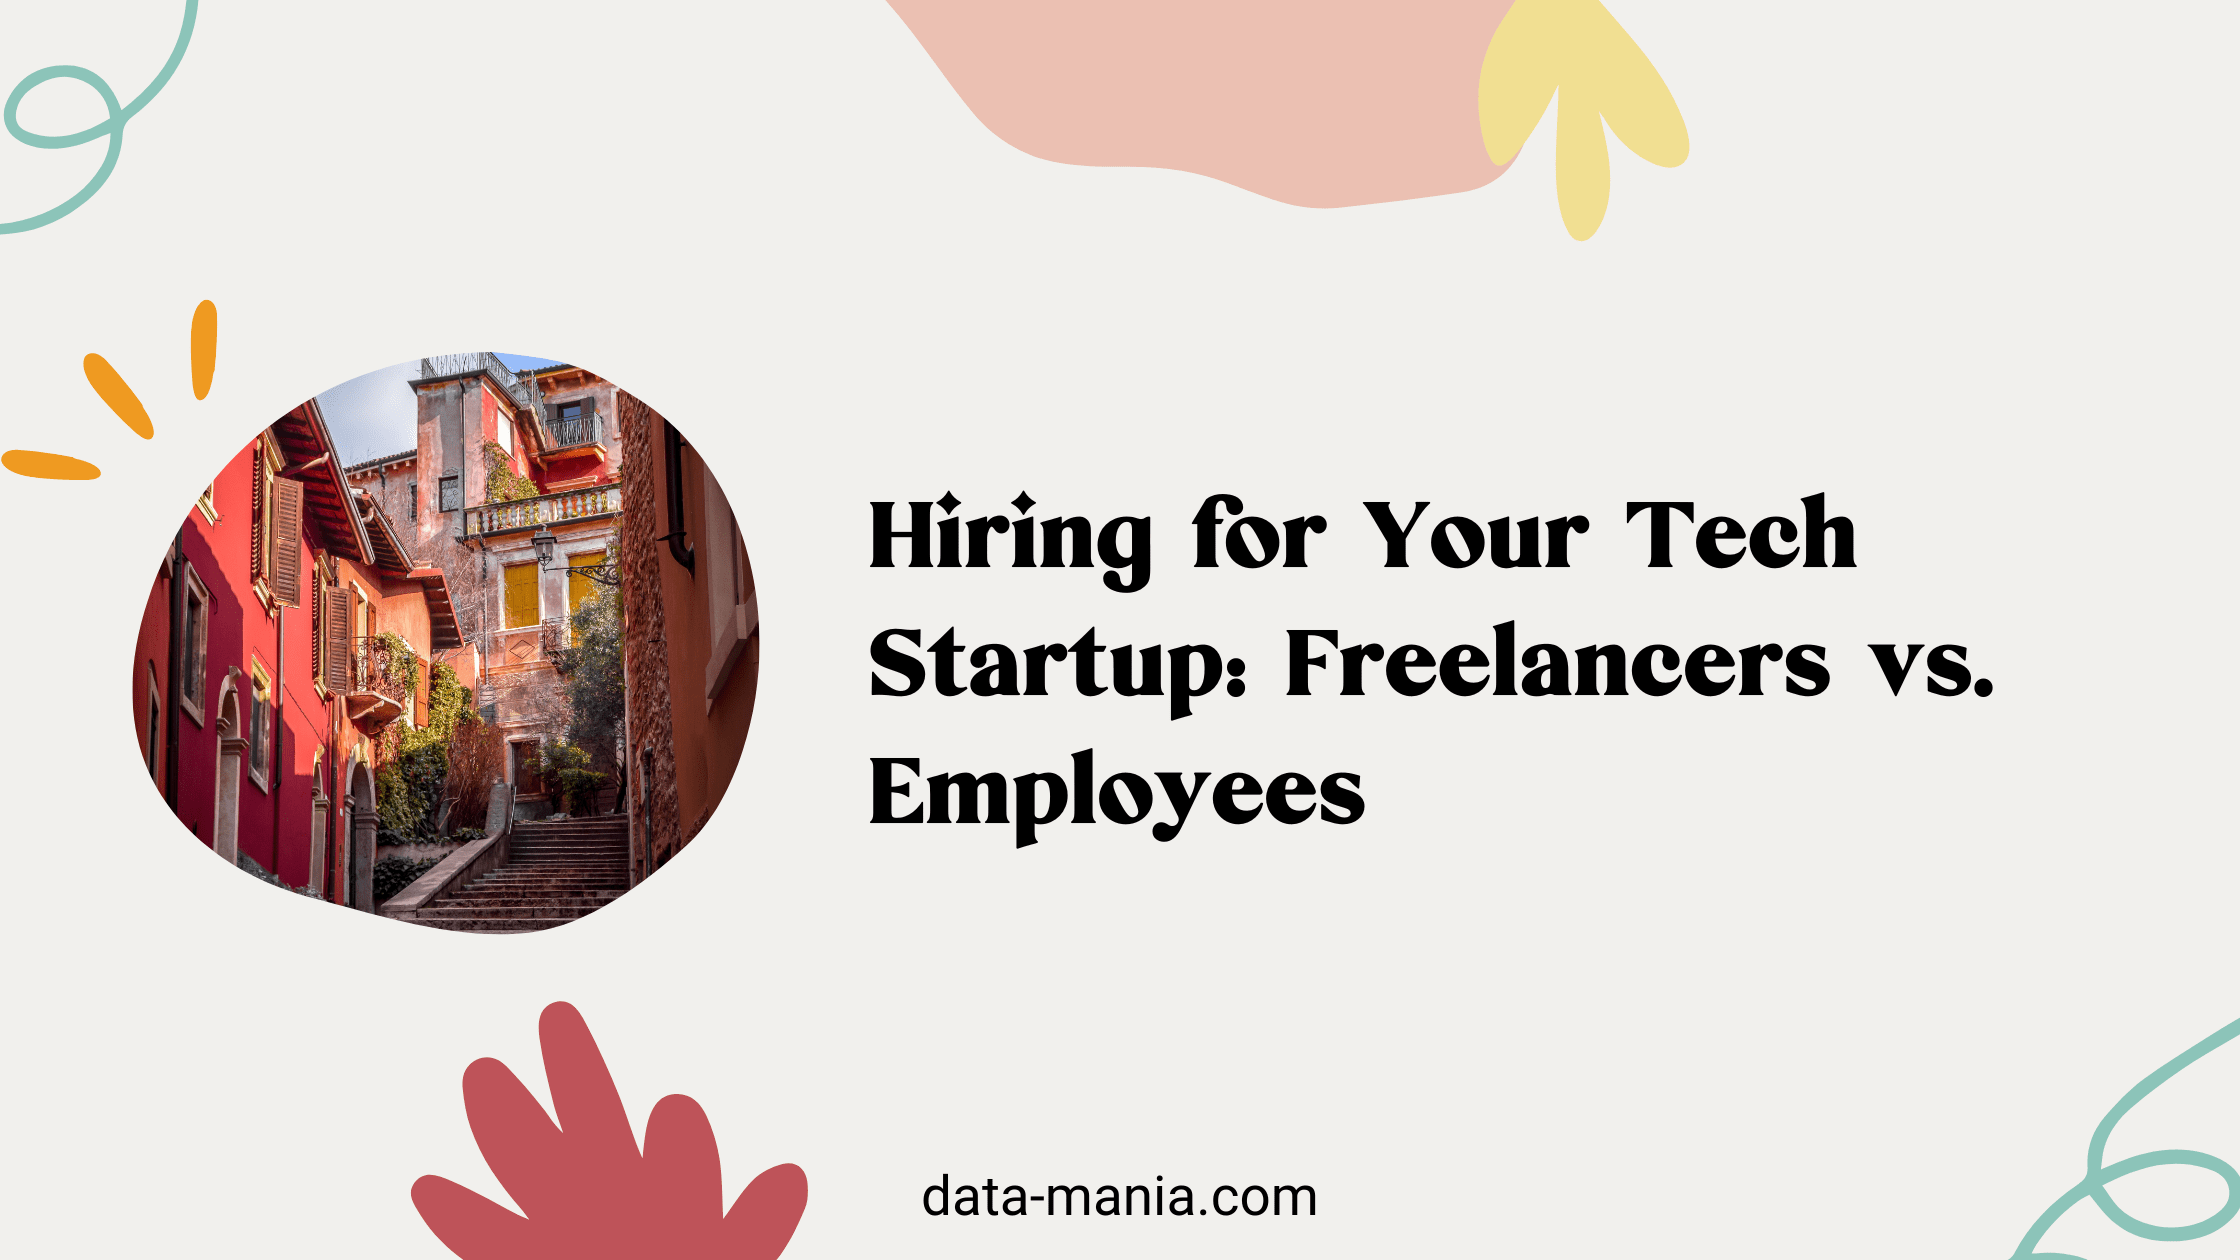 Freelancers vs. Employees: Tips in Hiring for your Tech Startup